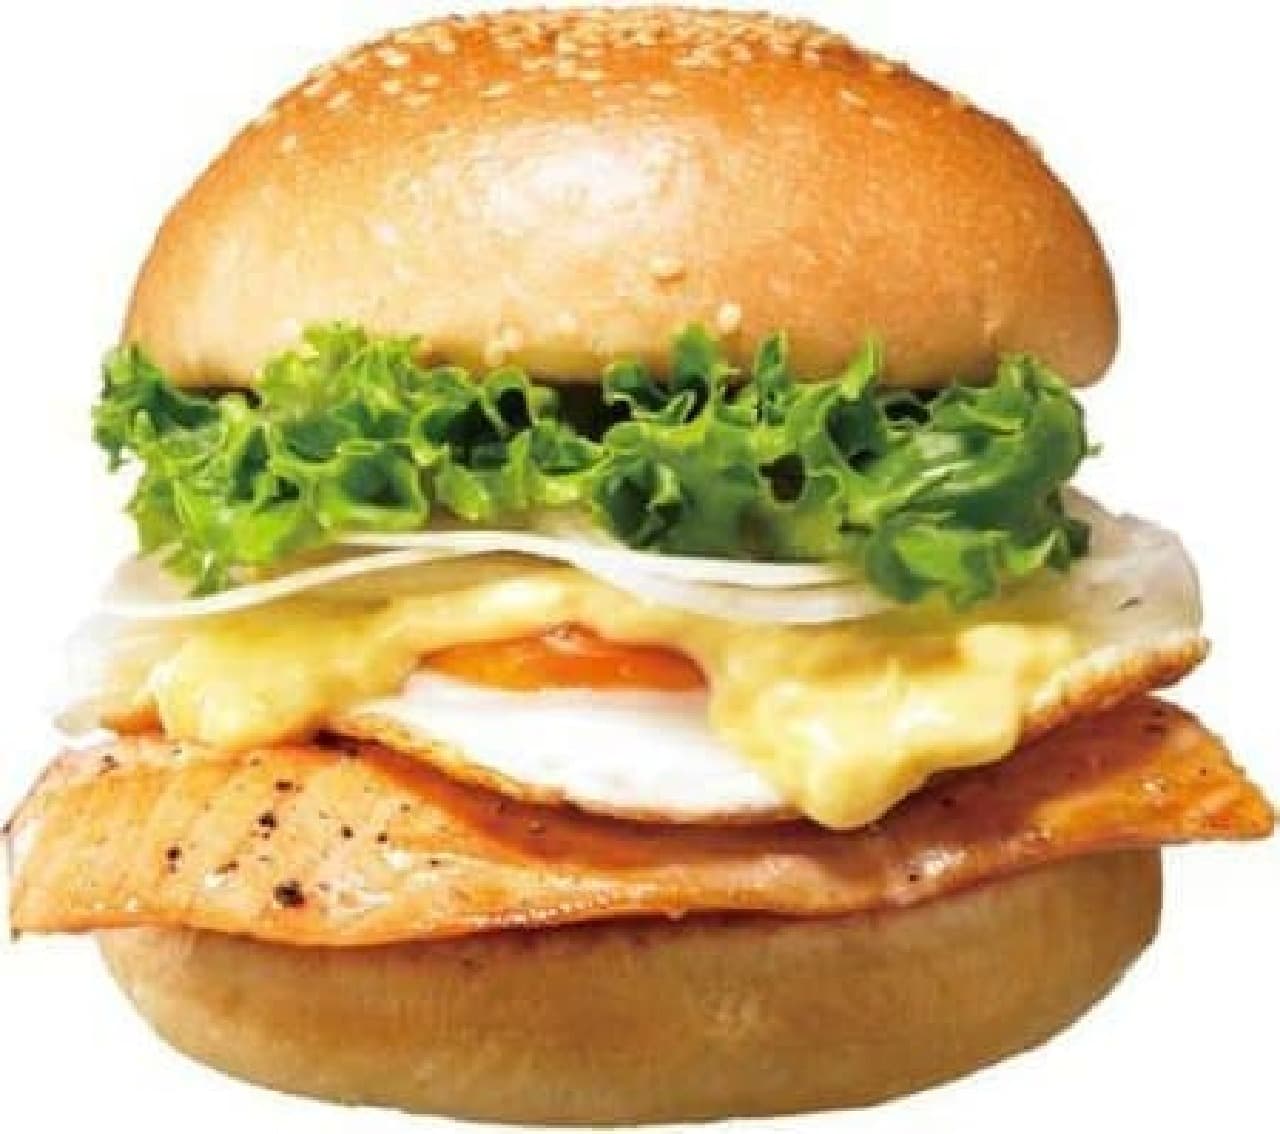 Eggs Benedict-style burger is back again this year!